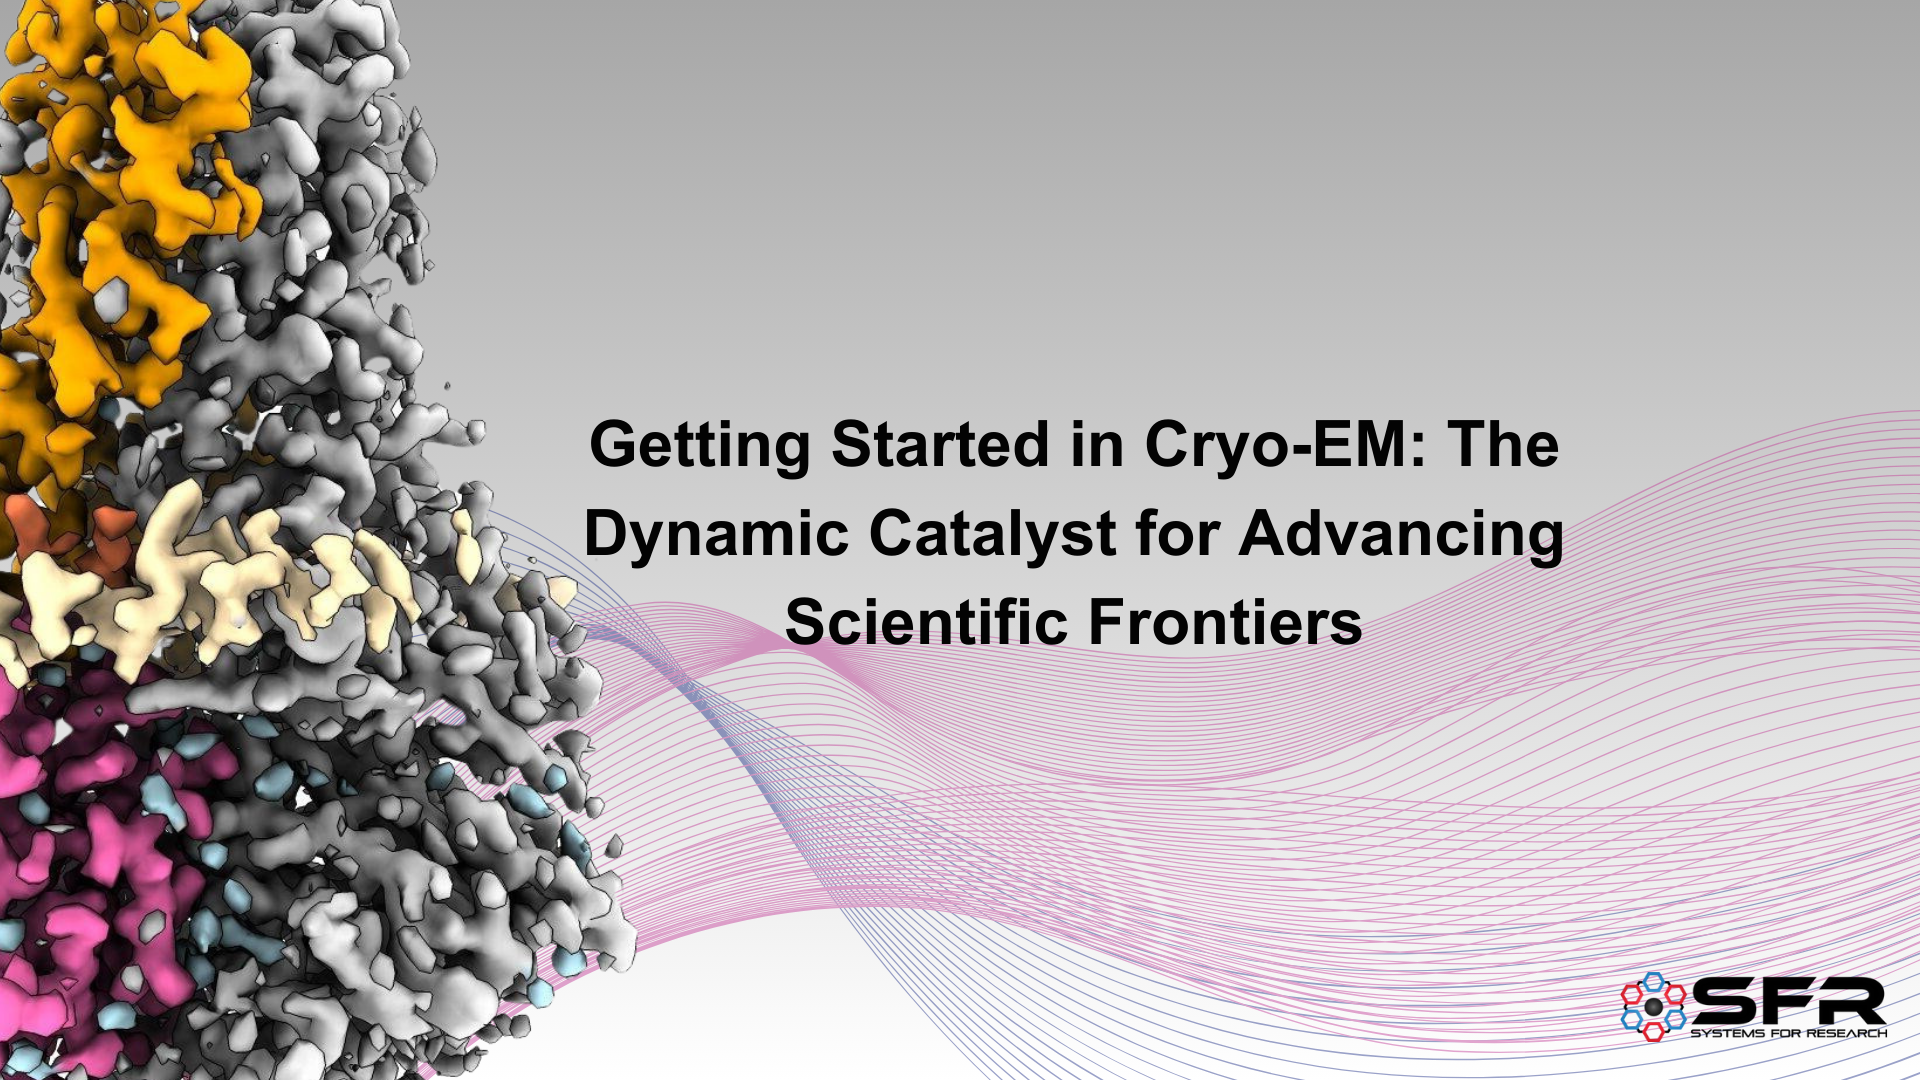 Getting Started in Cryo-EM: The Dynamic Catalyst for Advancing Scientific Frontiers